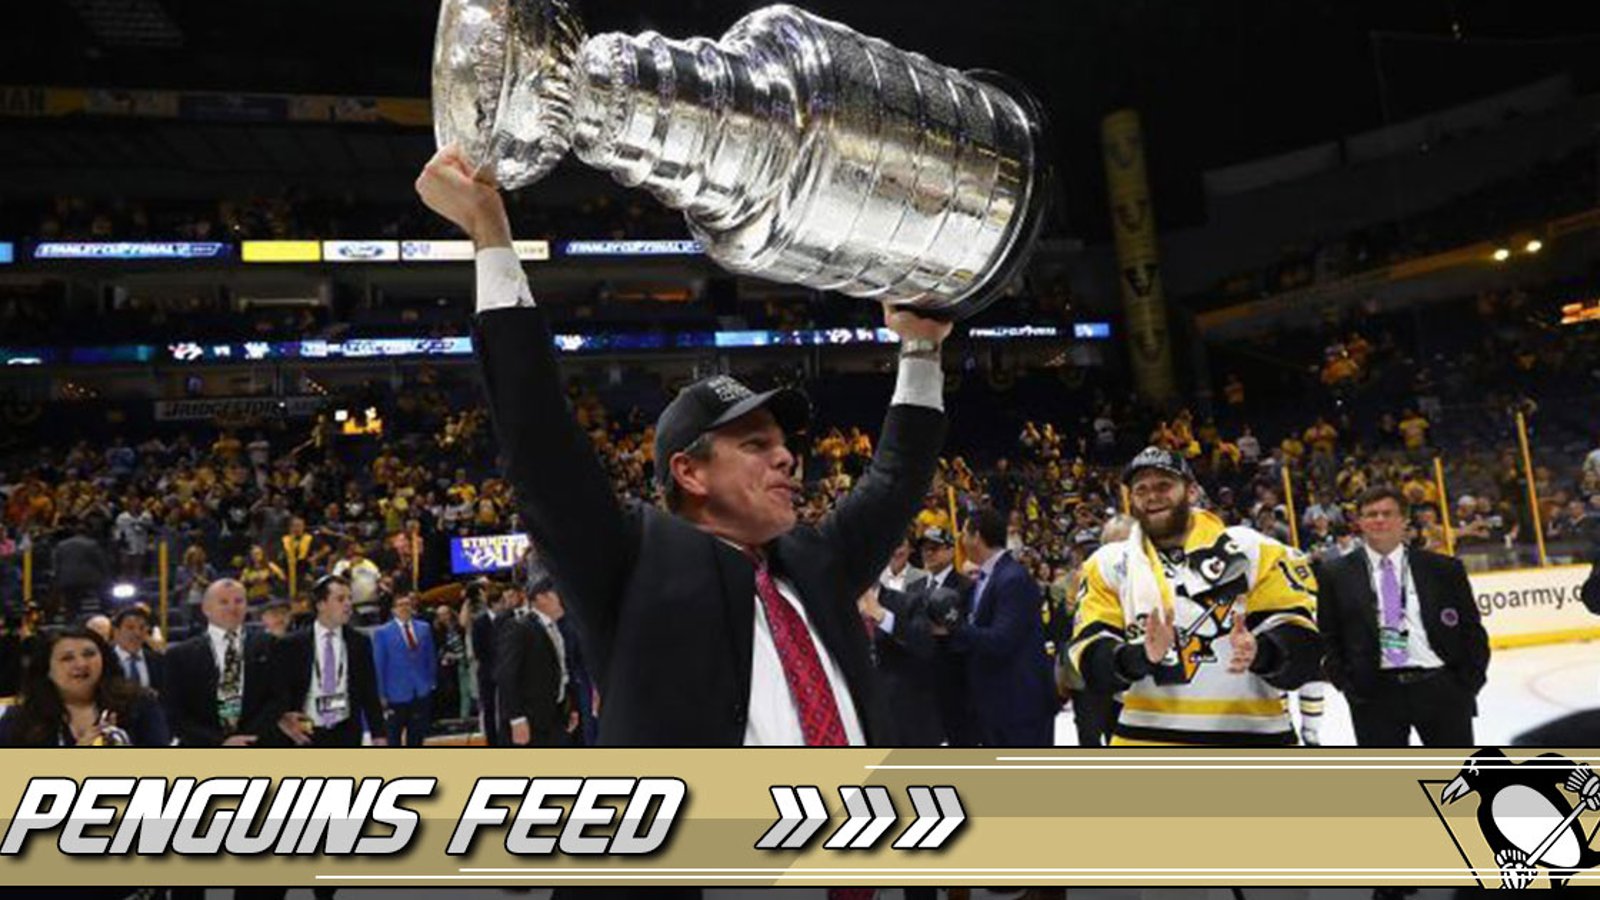 Pens coach Sullivan enters the record books with historic Stanley Cup win